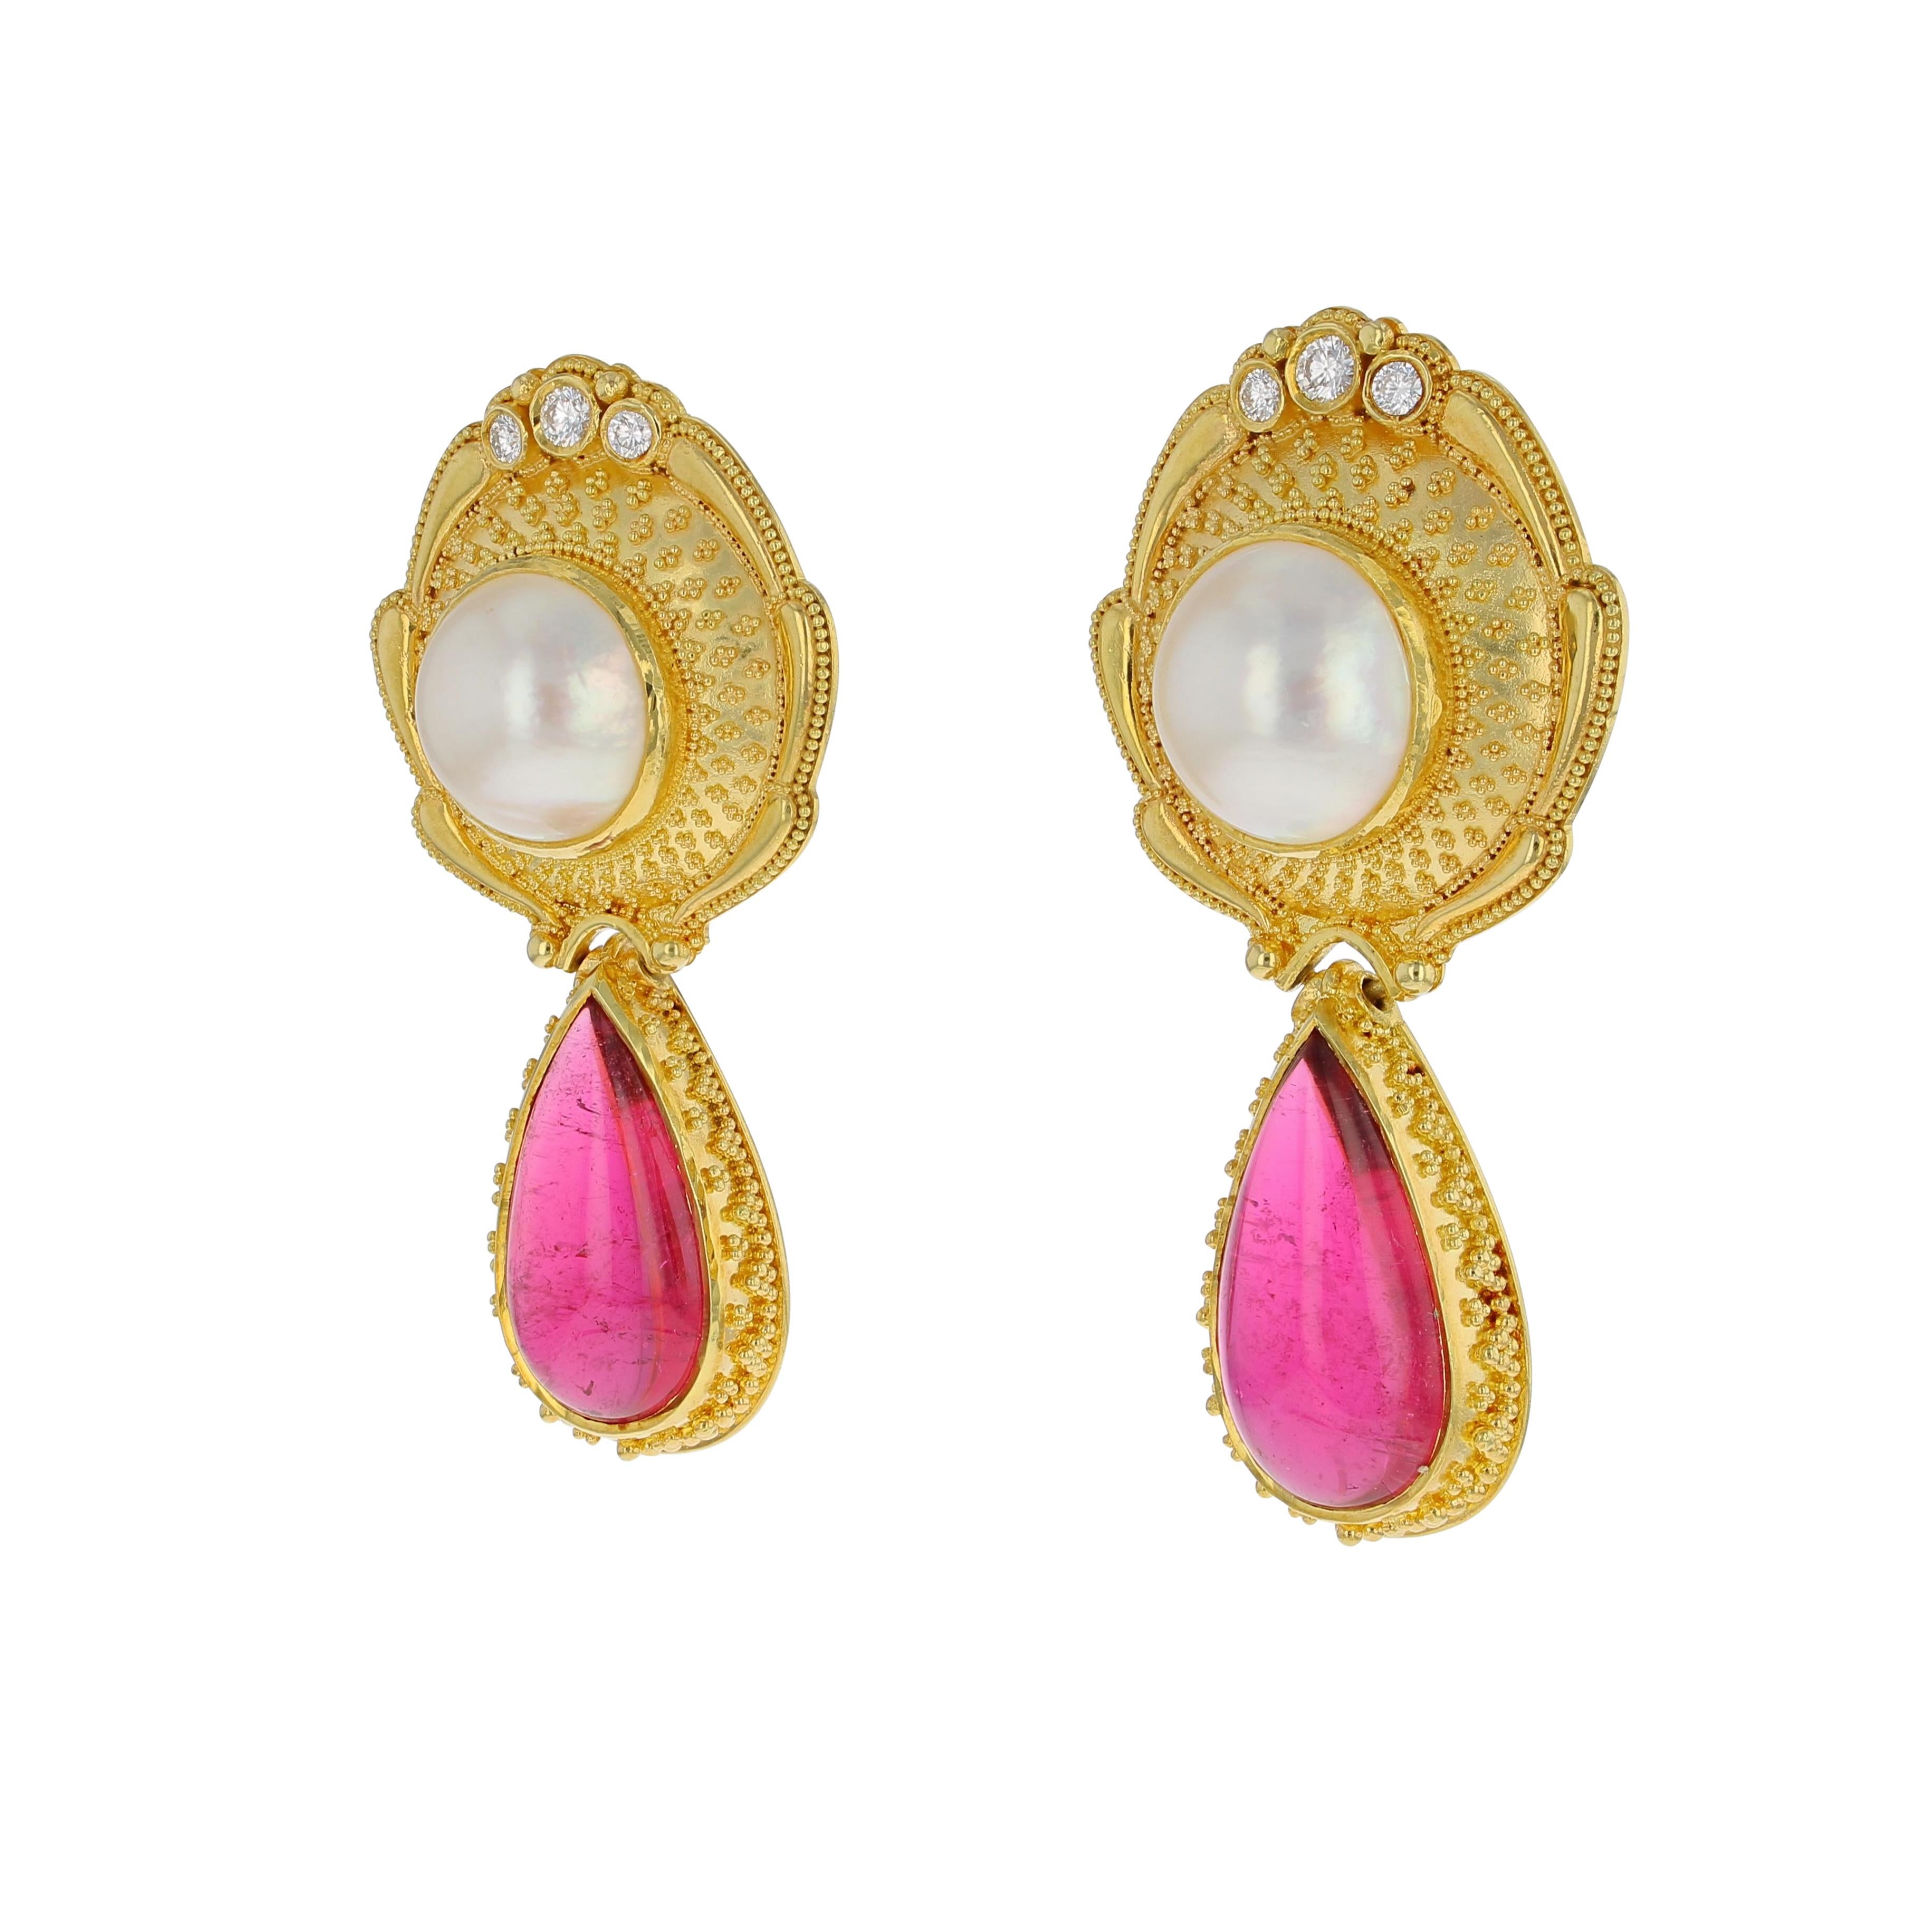 Artisan Kent Raible 18 Karat Gold Rubellite and Mabe Pearl Earring with Diamonds For Sale